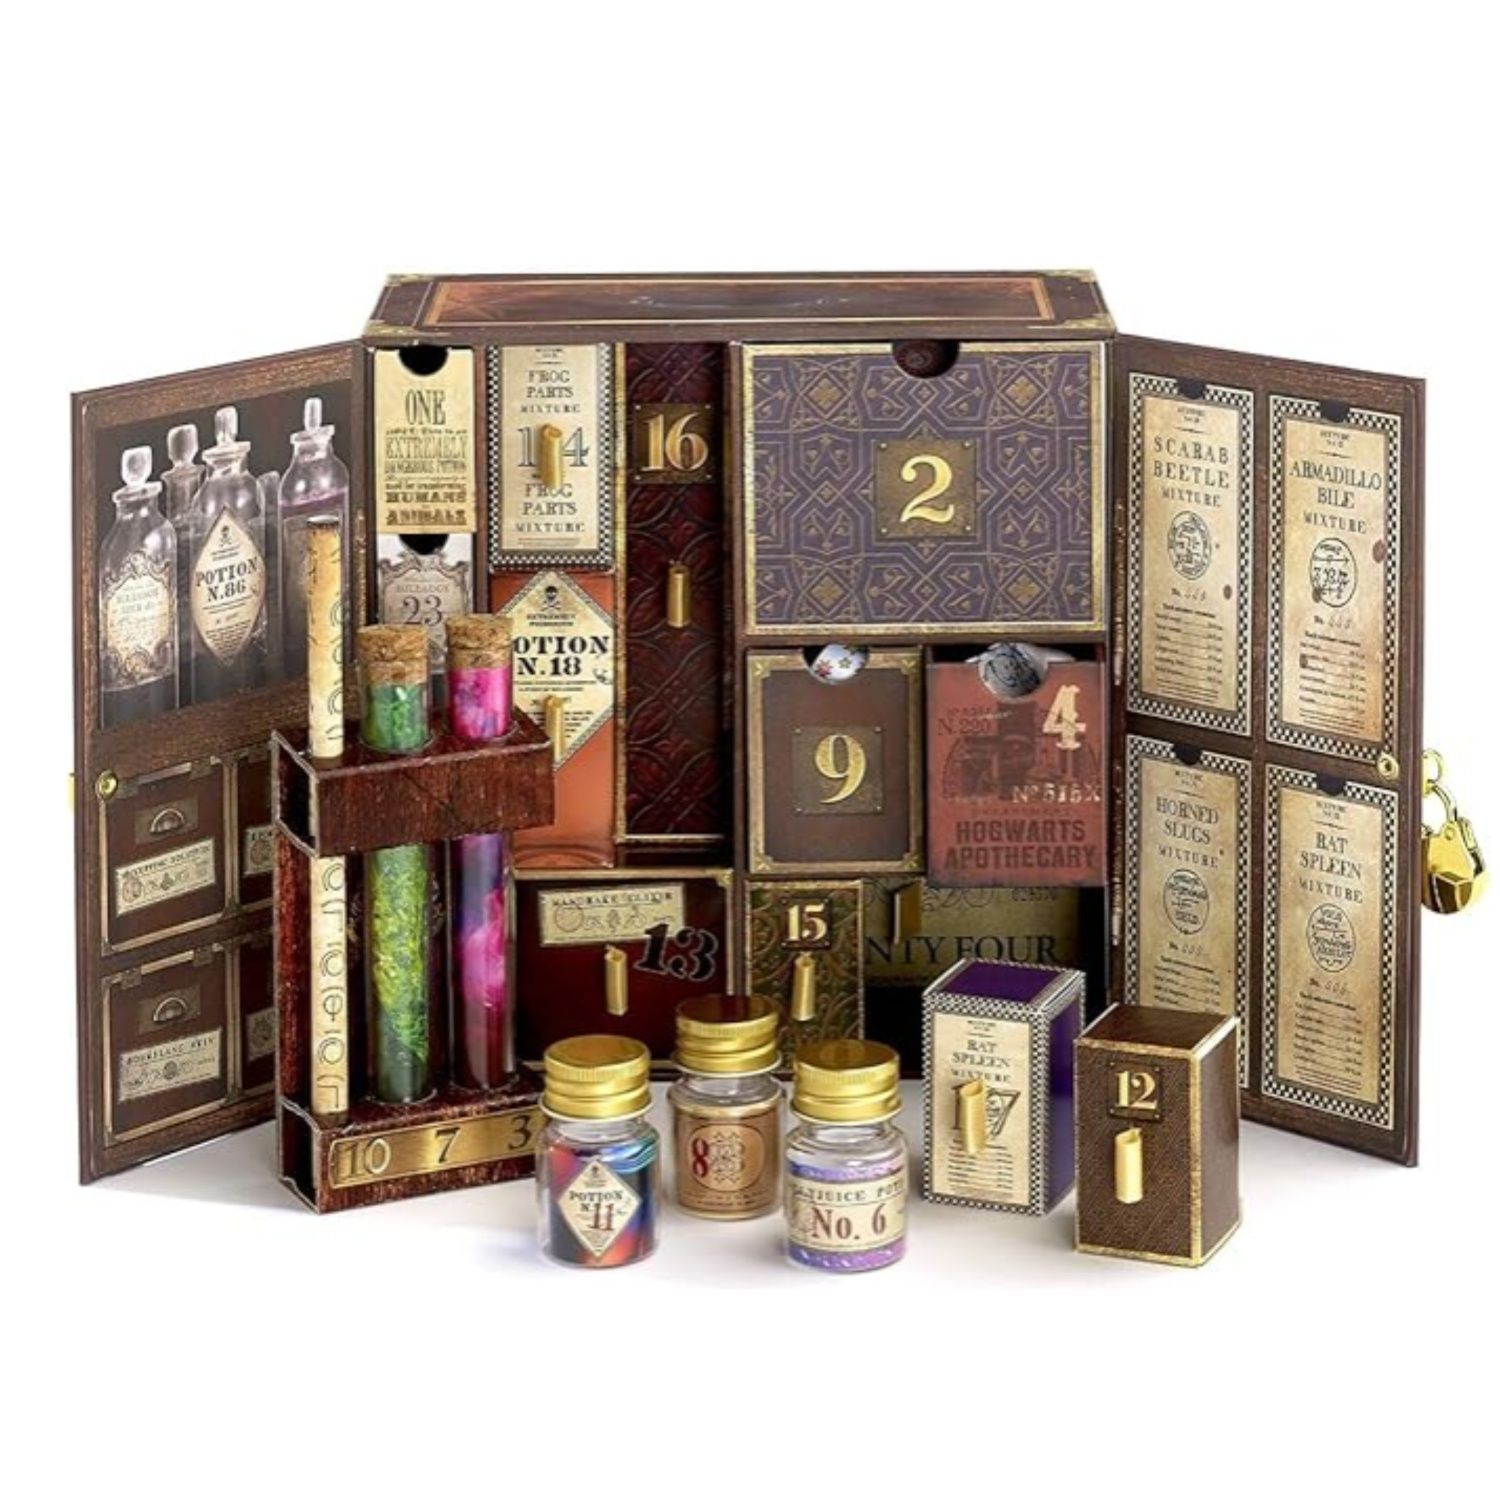 This product is an Harry Potter advent calendar with 24 surprise products and potions.